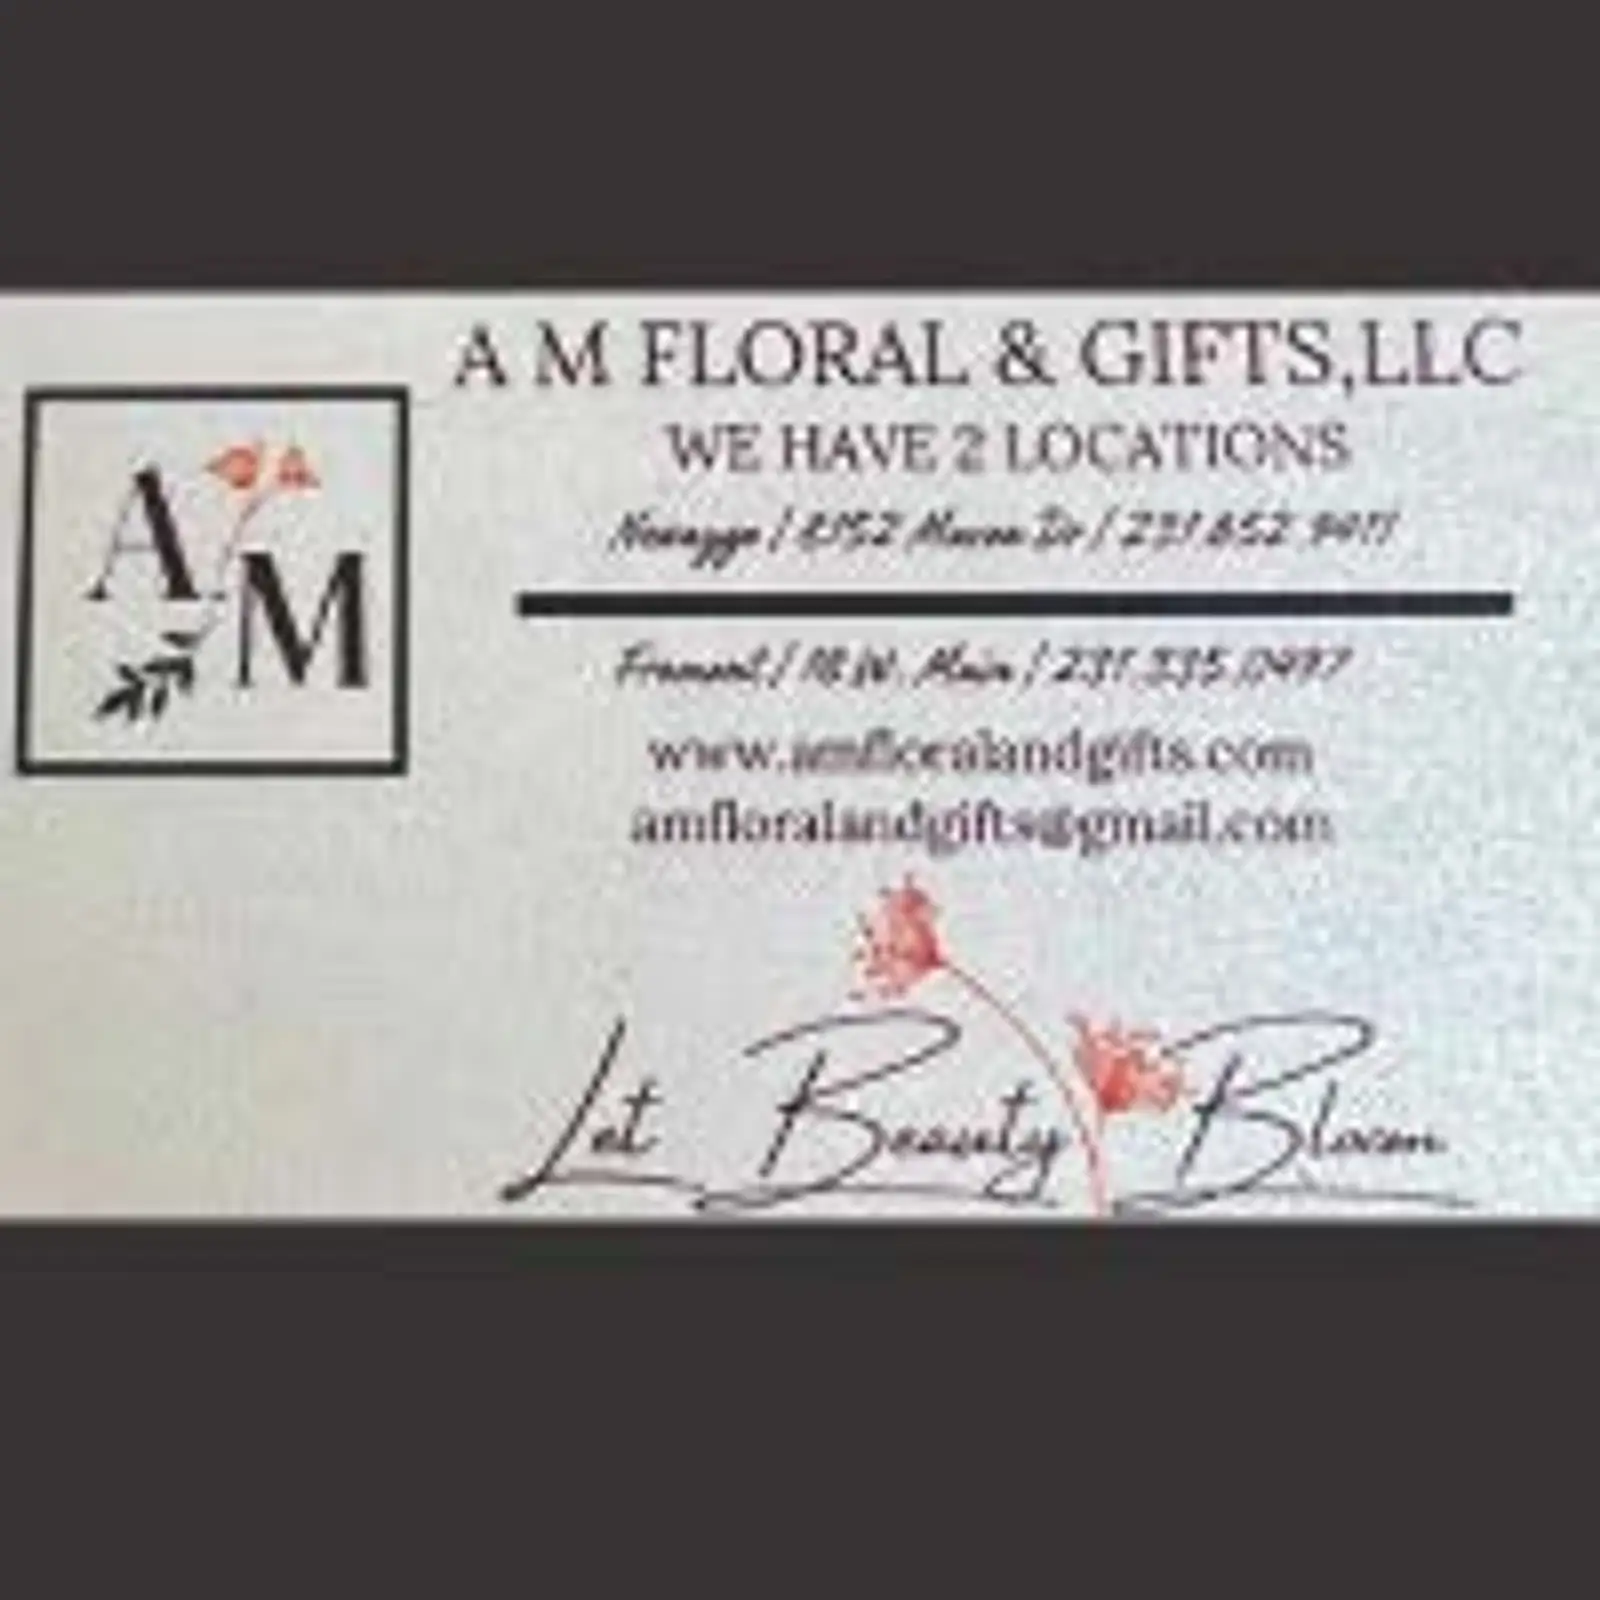 A M Floral & Gifts logo